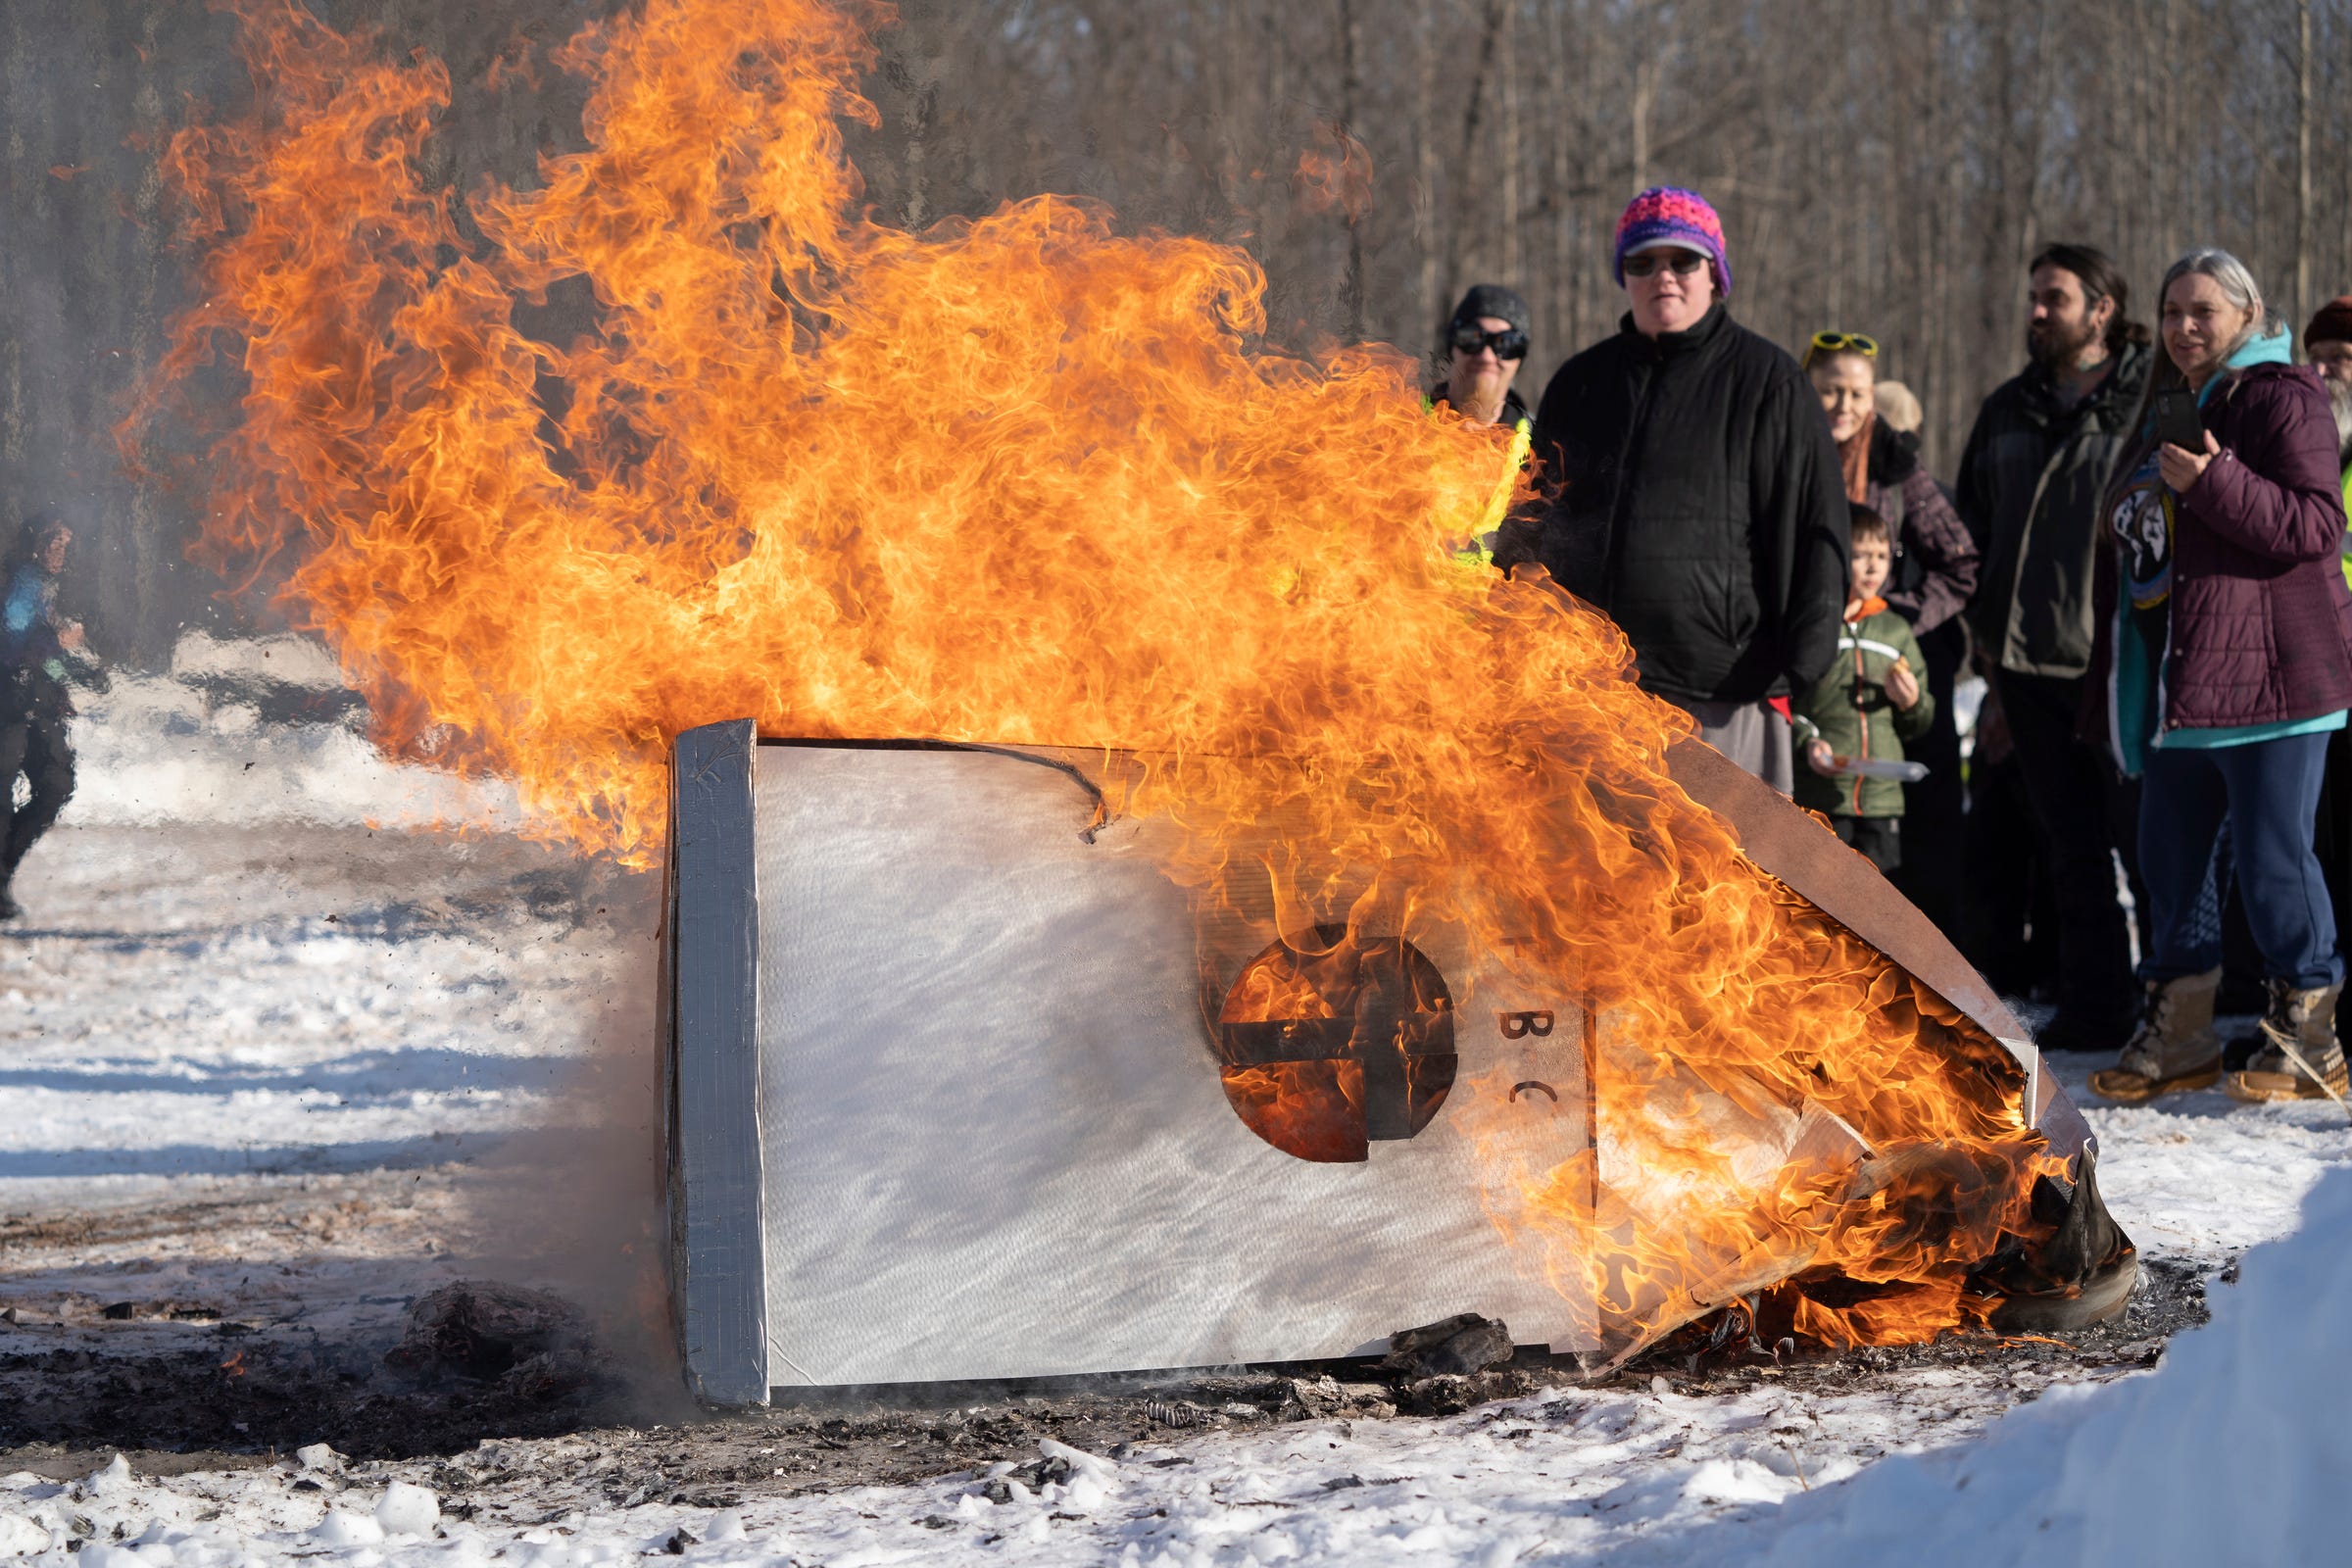 A church-shaped cardboard sled made by members of the First Baptist Church of Gwinn burns in a post-race bonfire at the K.I. Sawyer Cardboard Sled Races on Feb. 11, 2023.